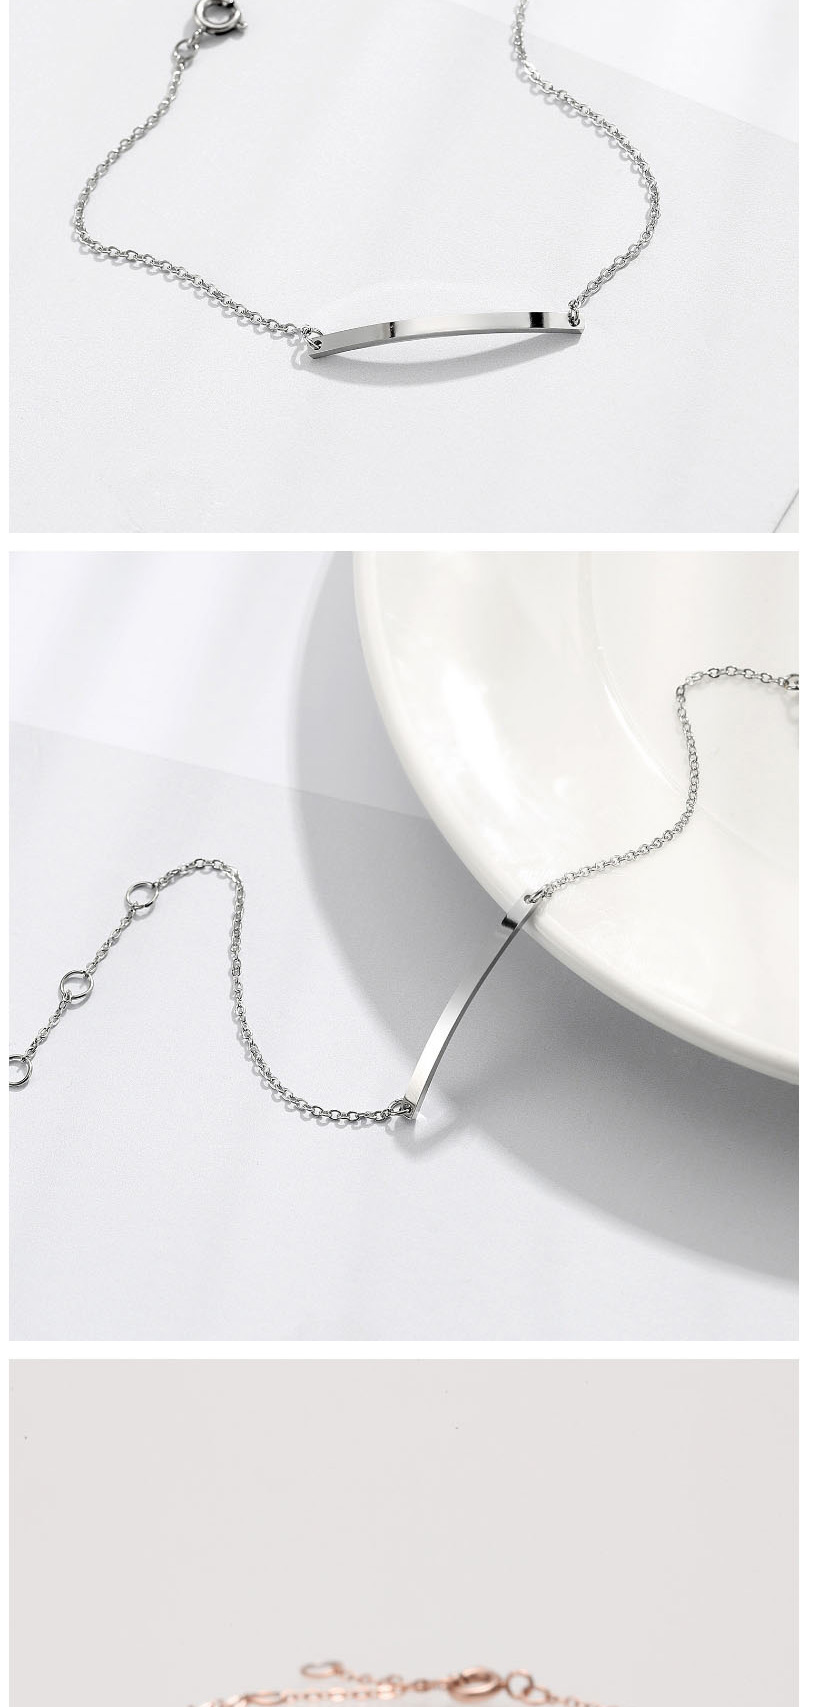 Fashion Steel Color Stainless Steel Word Smile Stitching Chain Bracelet,Bracelets